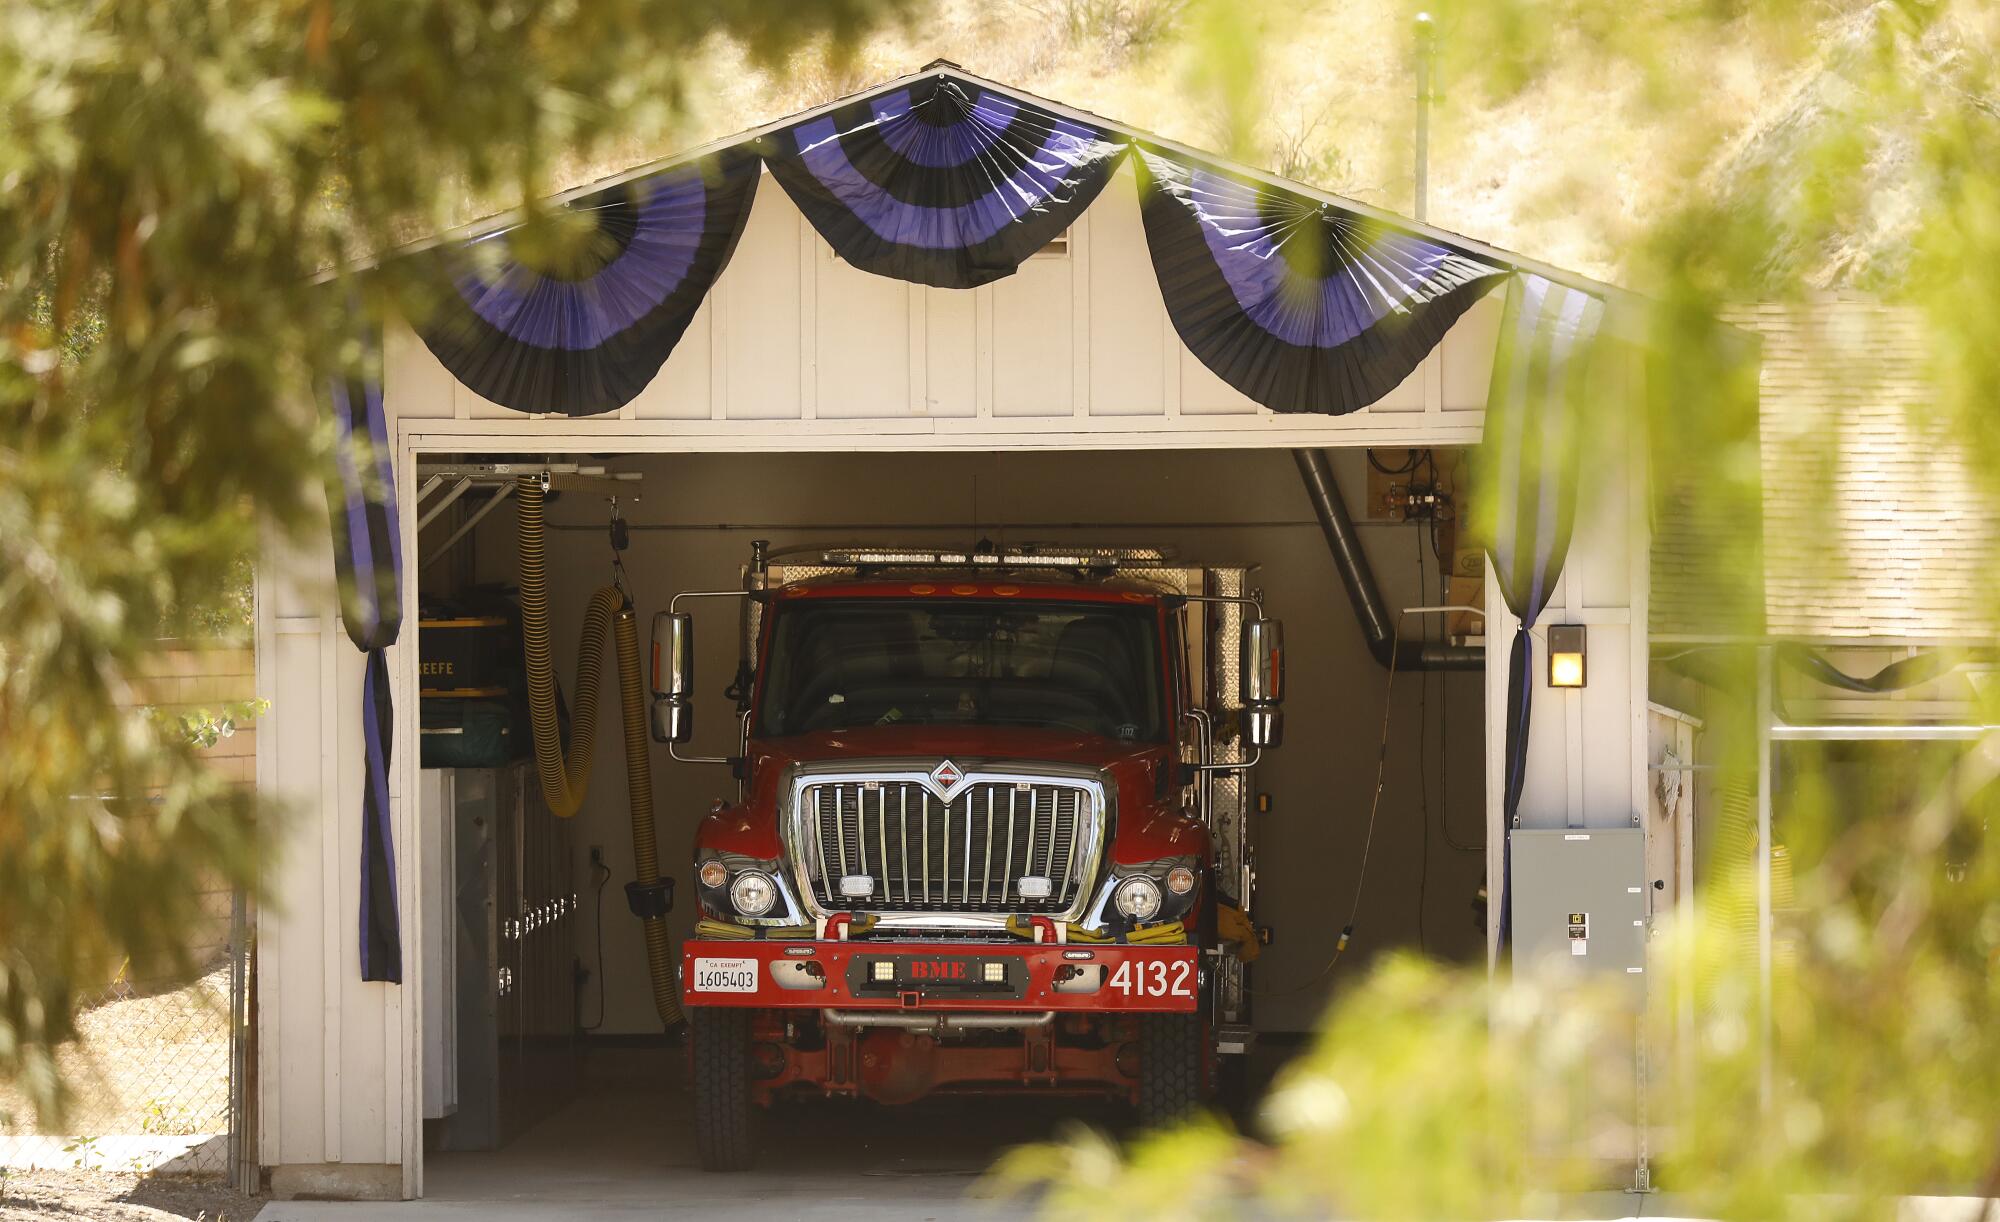 Mourning drapes hang above a fire engine at L.A. County Fire Station 81 in Agua Dulce.